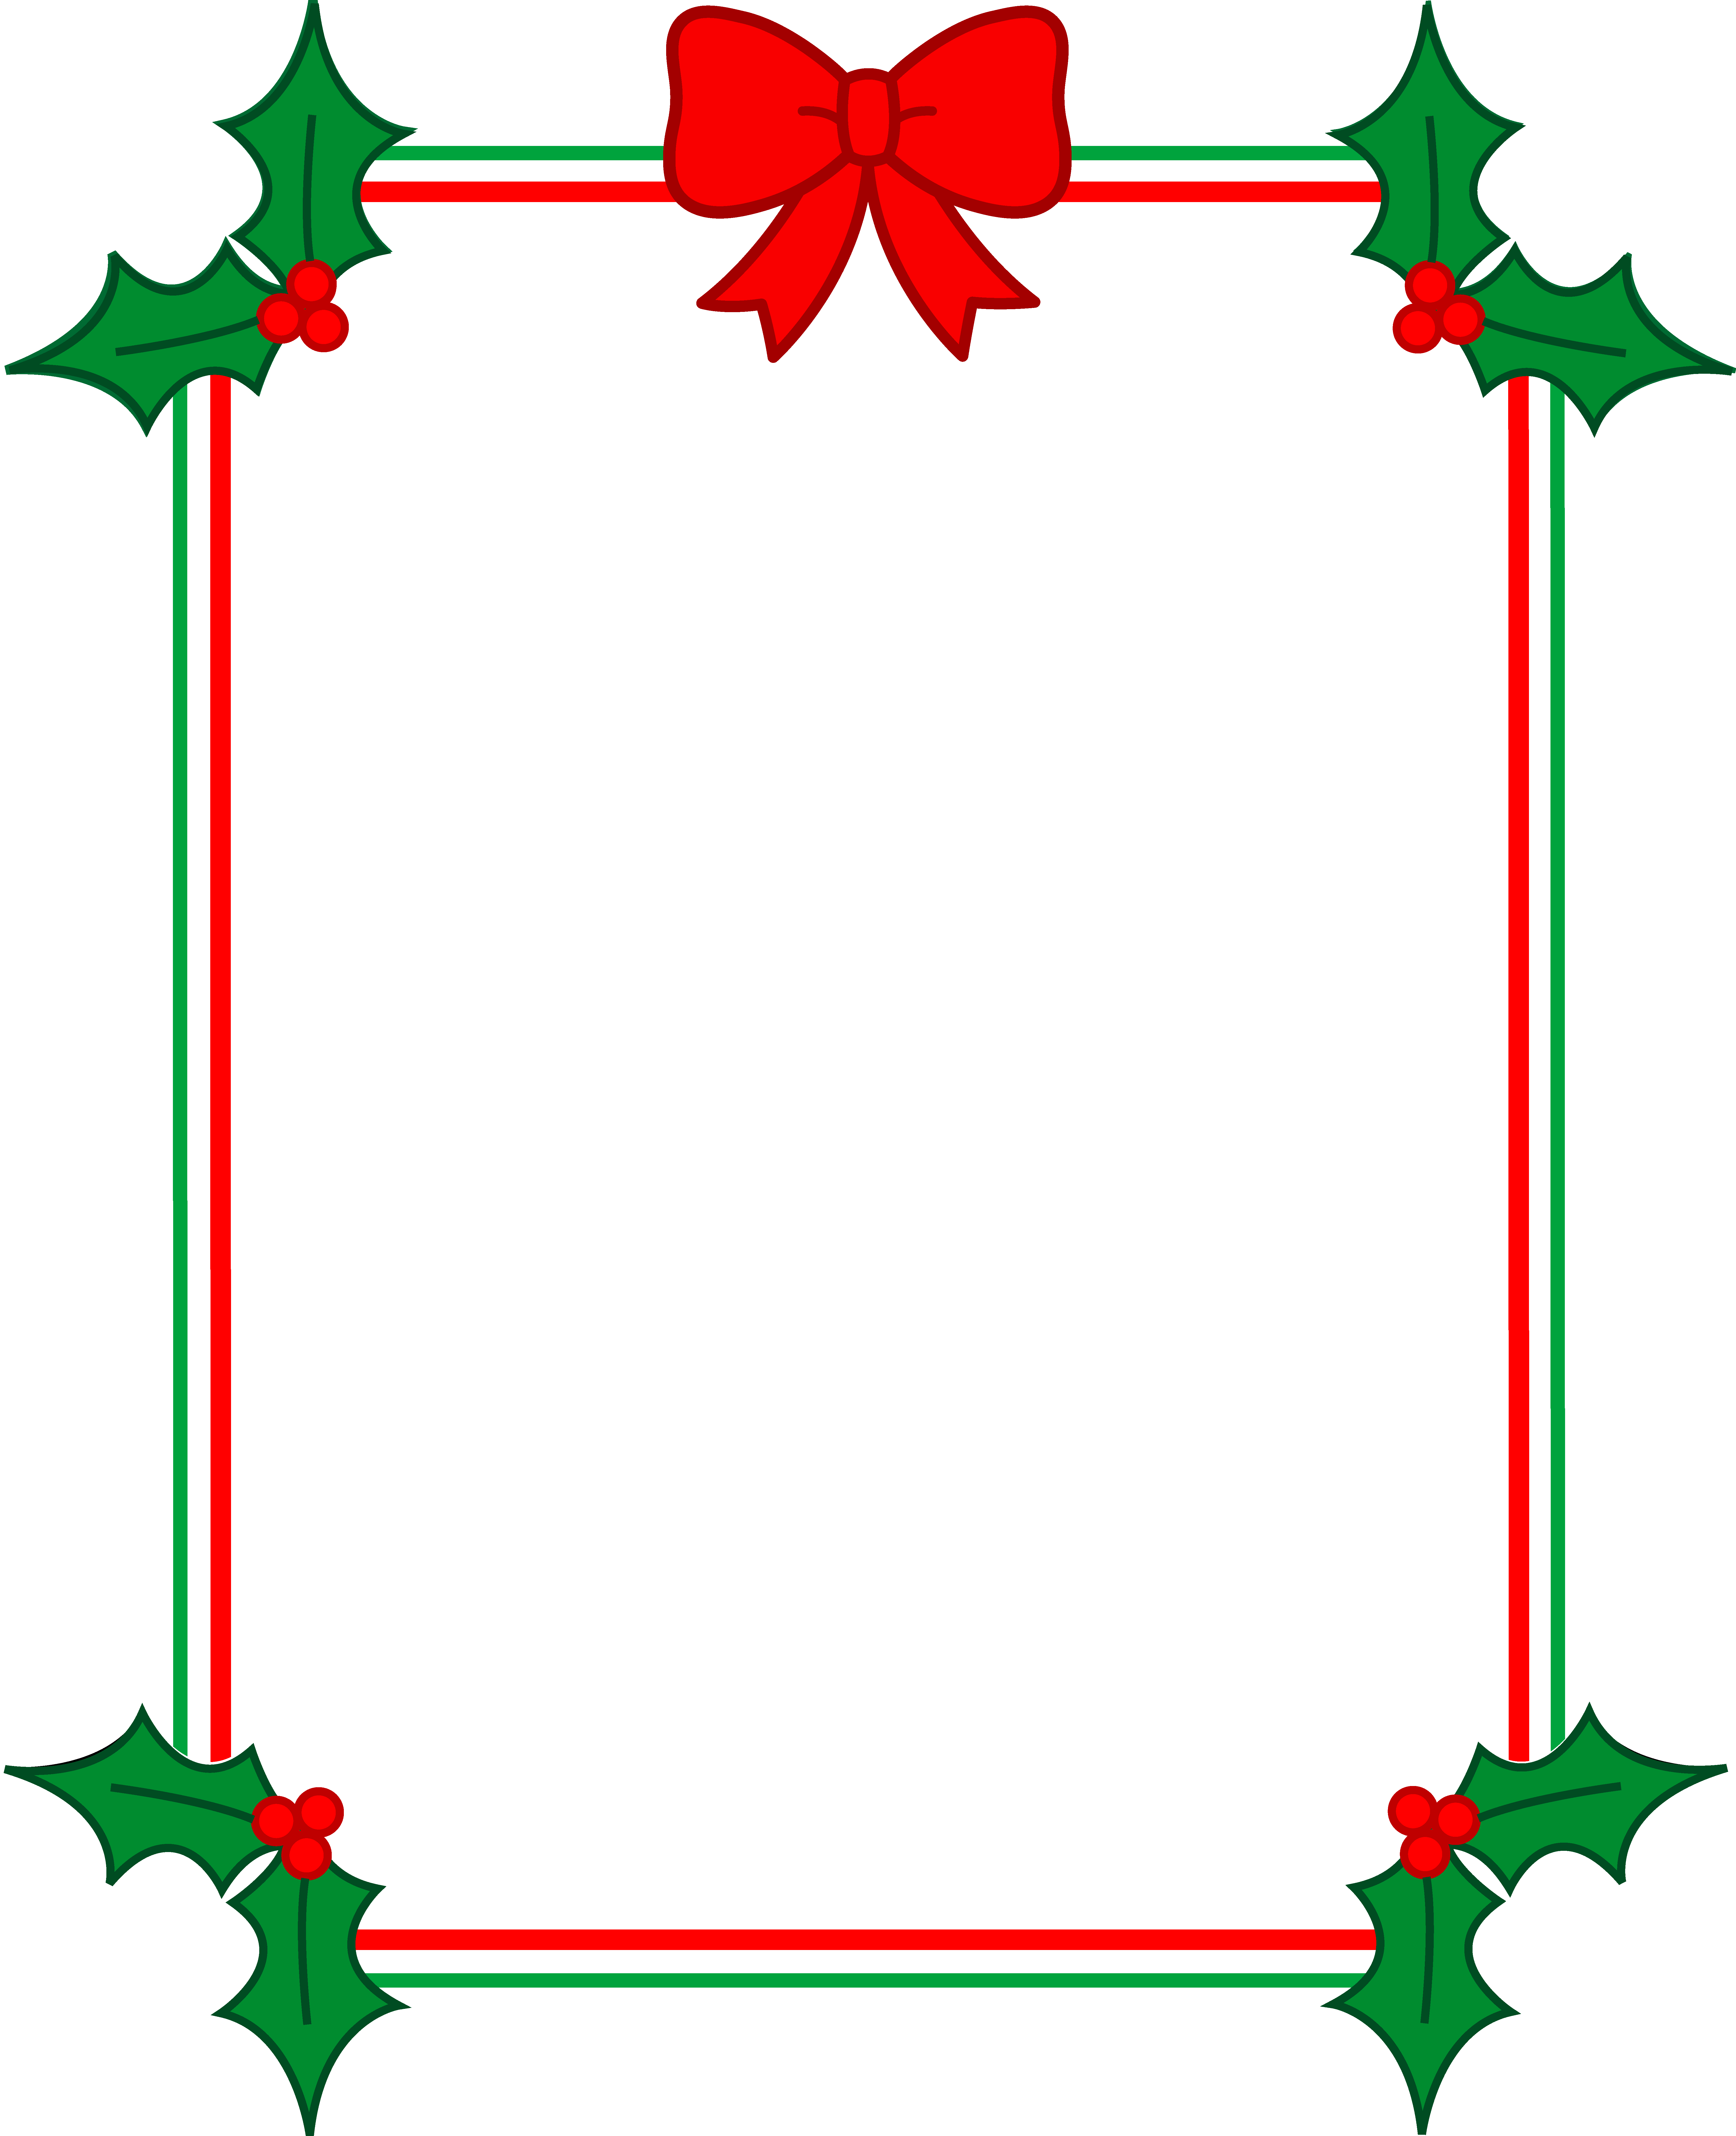 Christmas lights frame png. Border with holly and